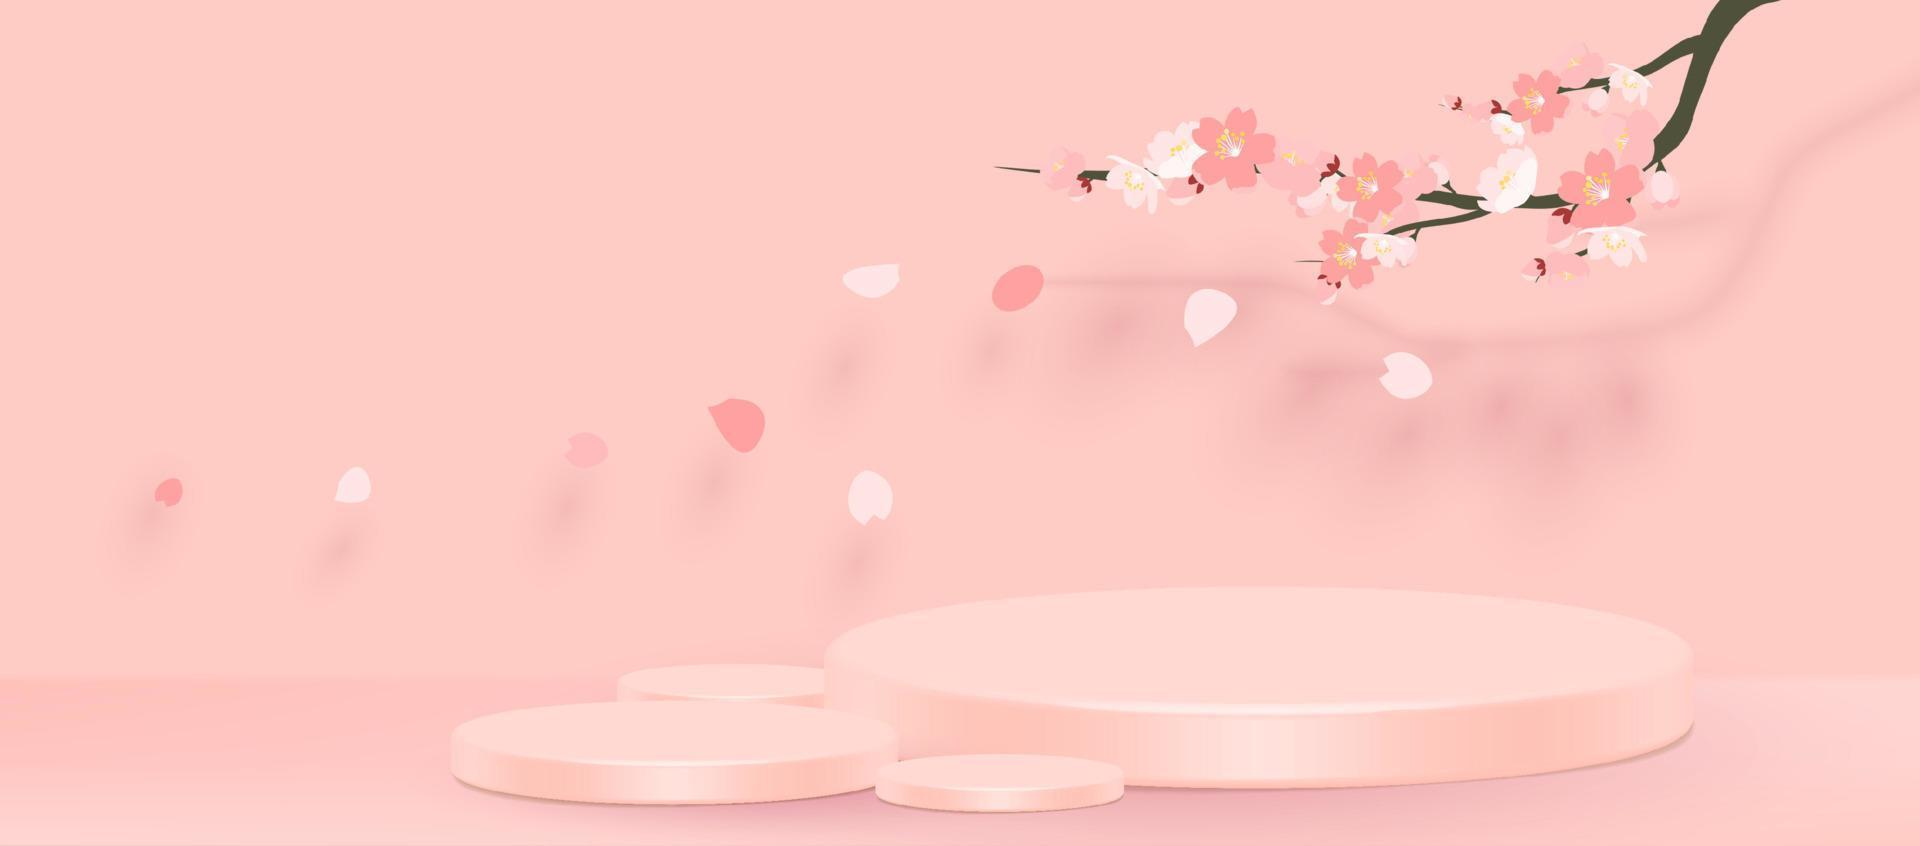 Abstract minimal scene with geometric forms. cylinder podium in pink background with pink sakura flower. product presentation, mockup, show product, podium, stage pedestal or platform. 3d vector. vector